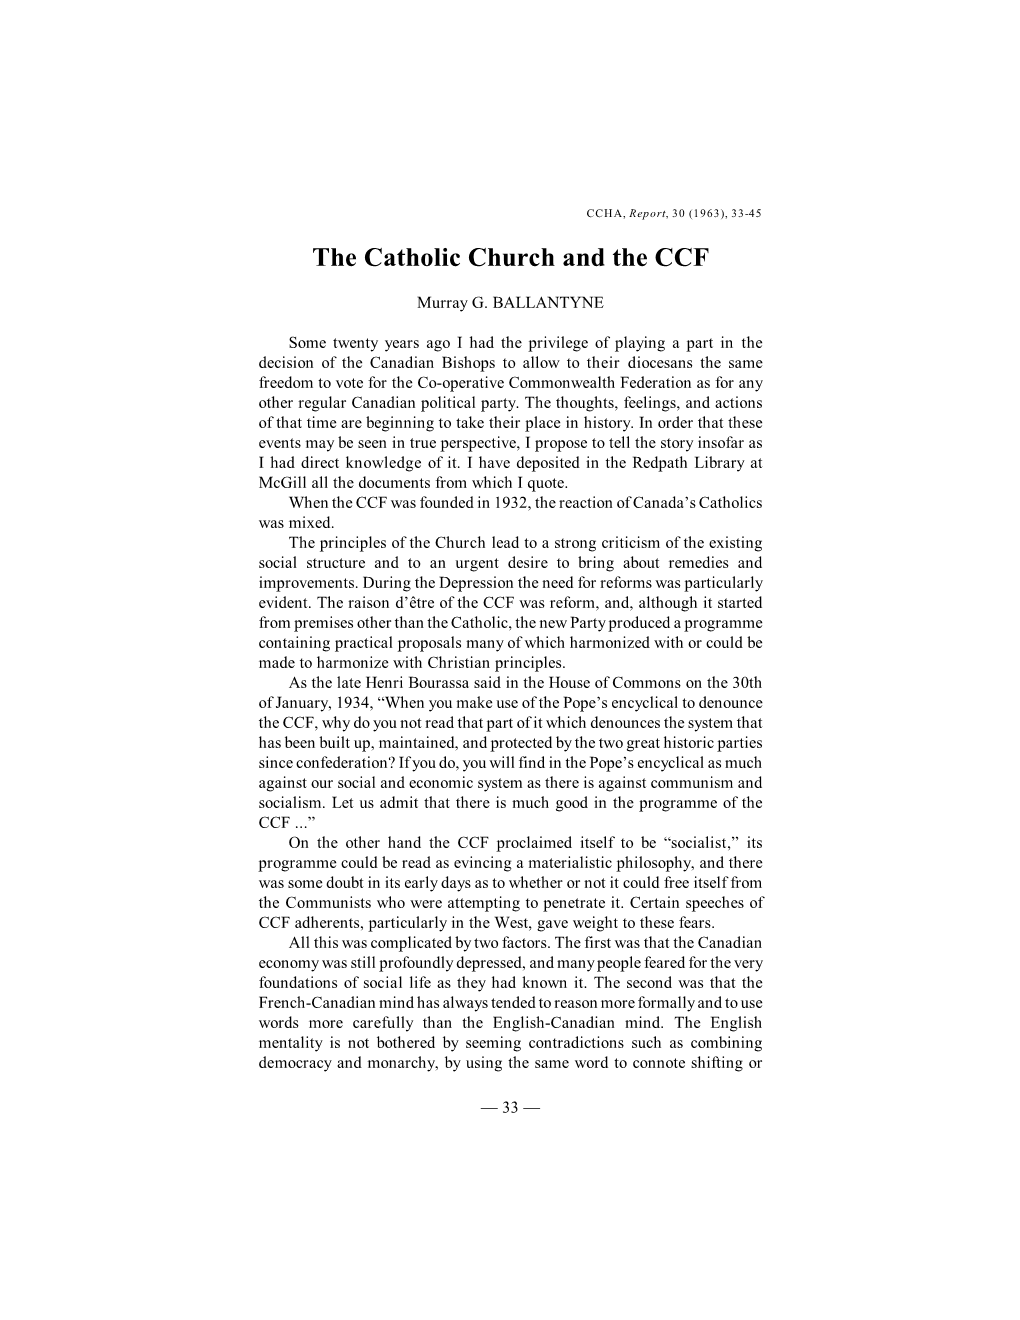 The Catholic Church and the CCF